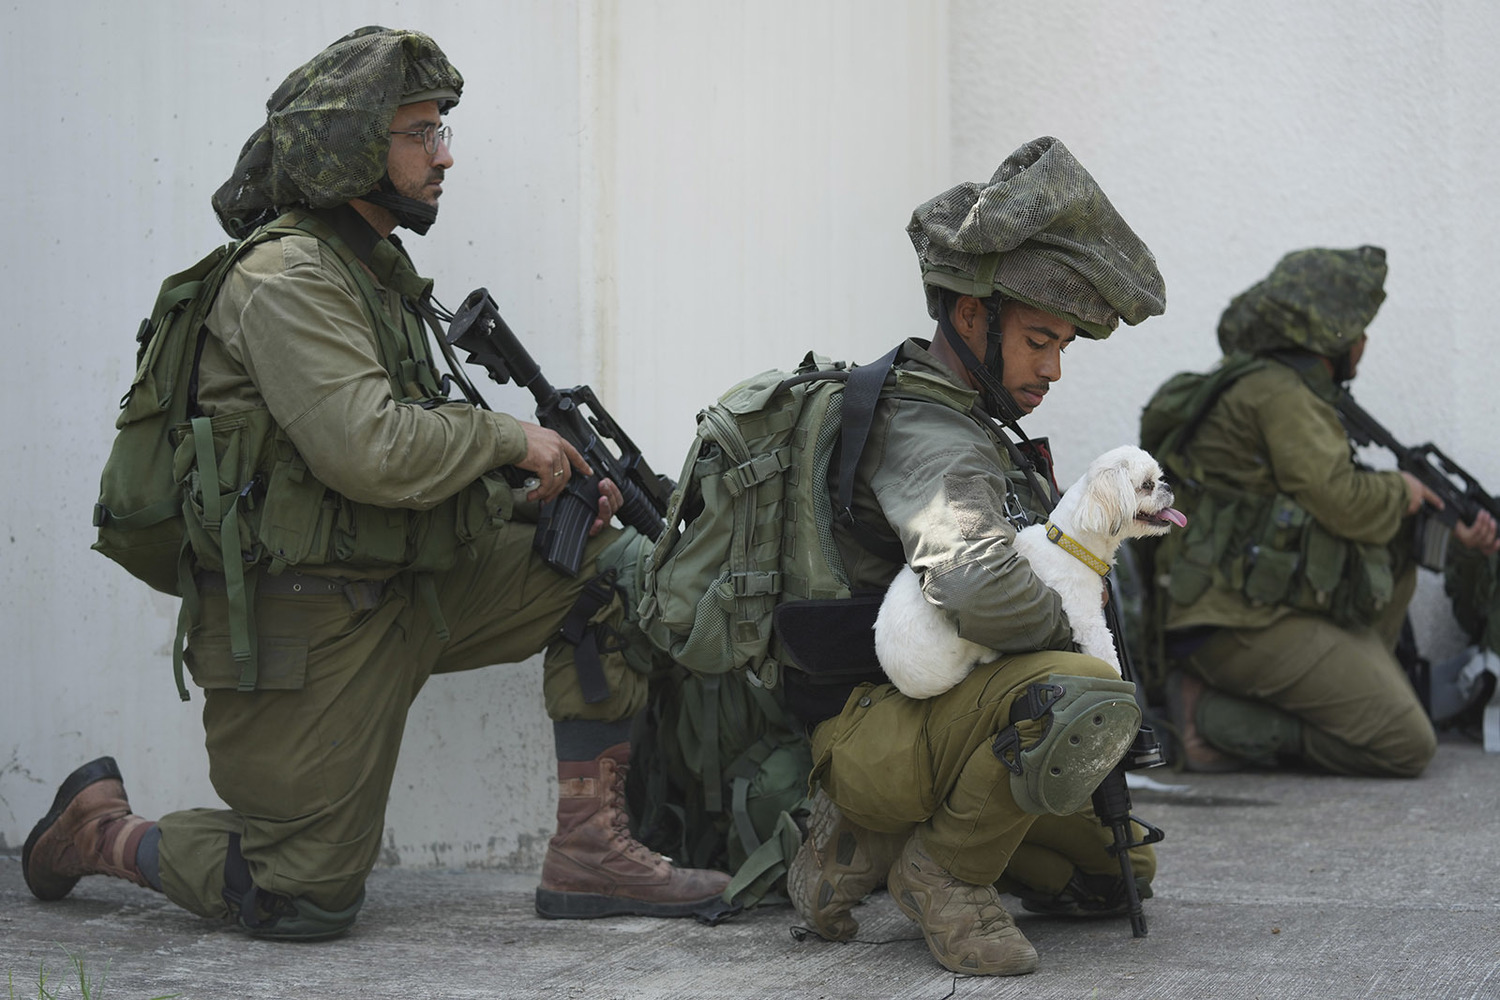 An Israeli soldier with a dog of the dead, grief in Gaza: images of the war are heartbreaking 